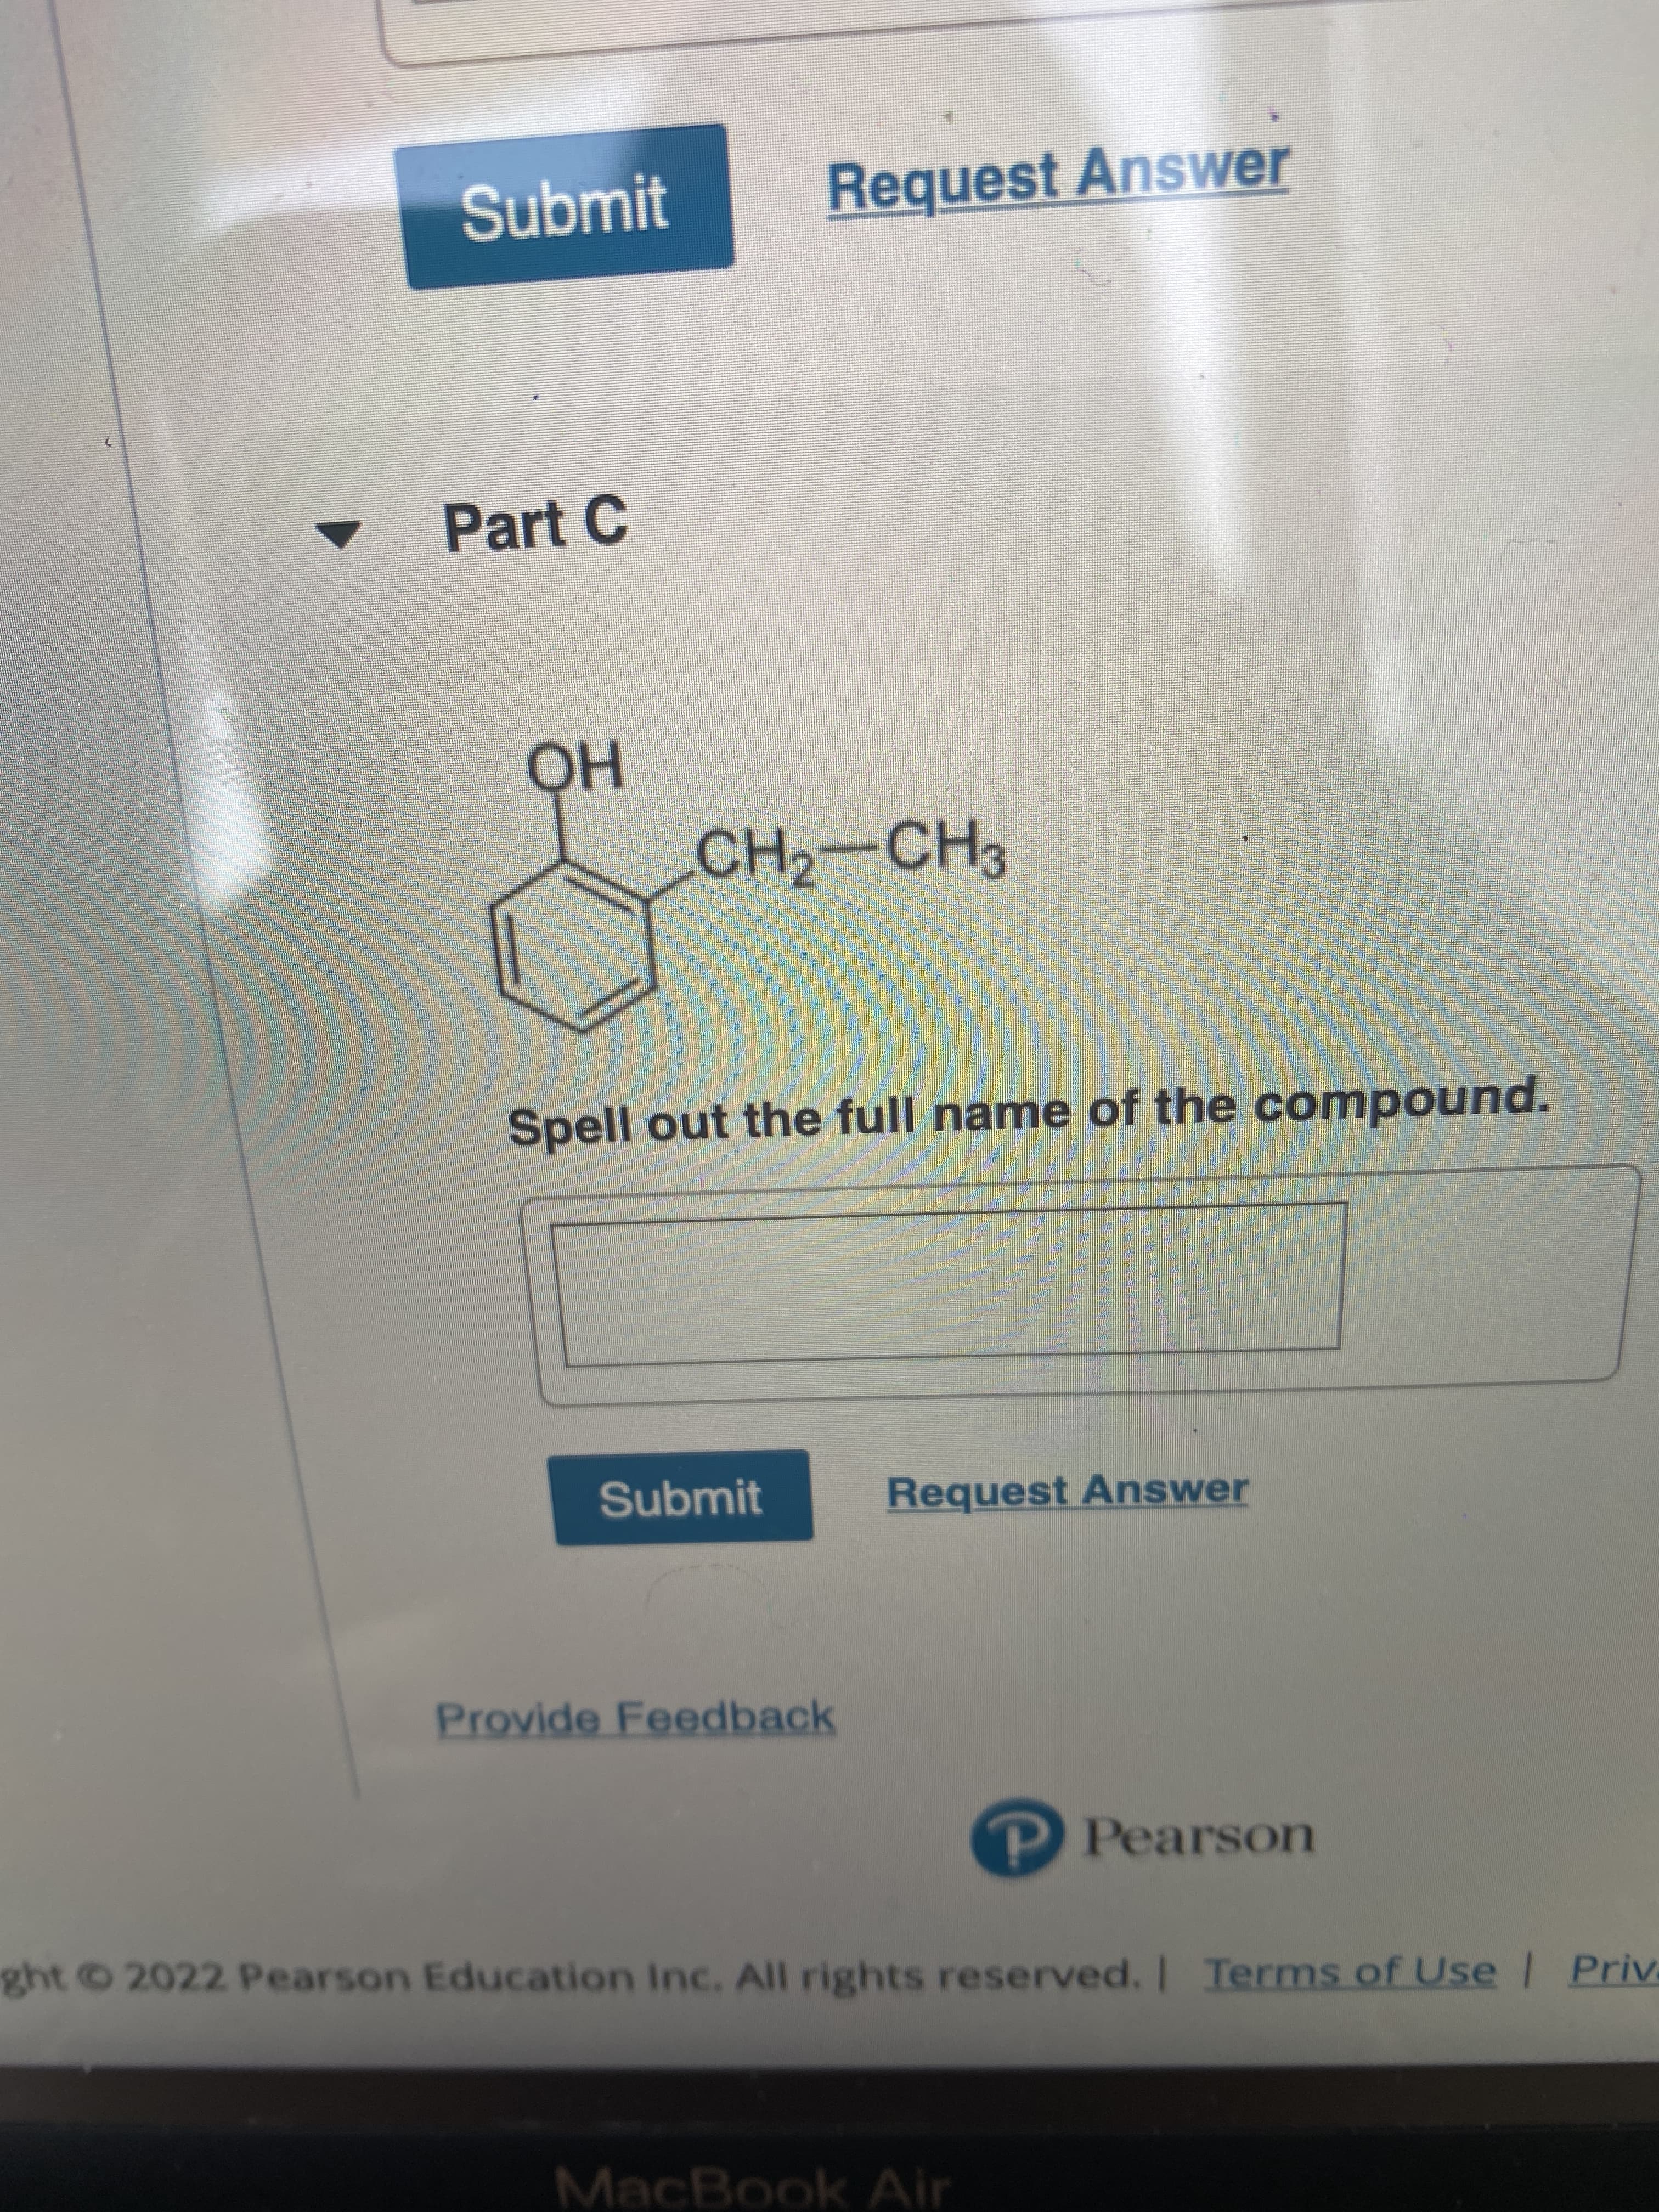 Submit
Request Answer
Part C
но
CH2-CH3
Spell out the full name of the compound.
Submit
Request Answer
Provide Feedback
P Pearson
ght 2022 Pearson Education Inc. All rights reserved. I Terms of Use | Priva
MacBook Air
